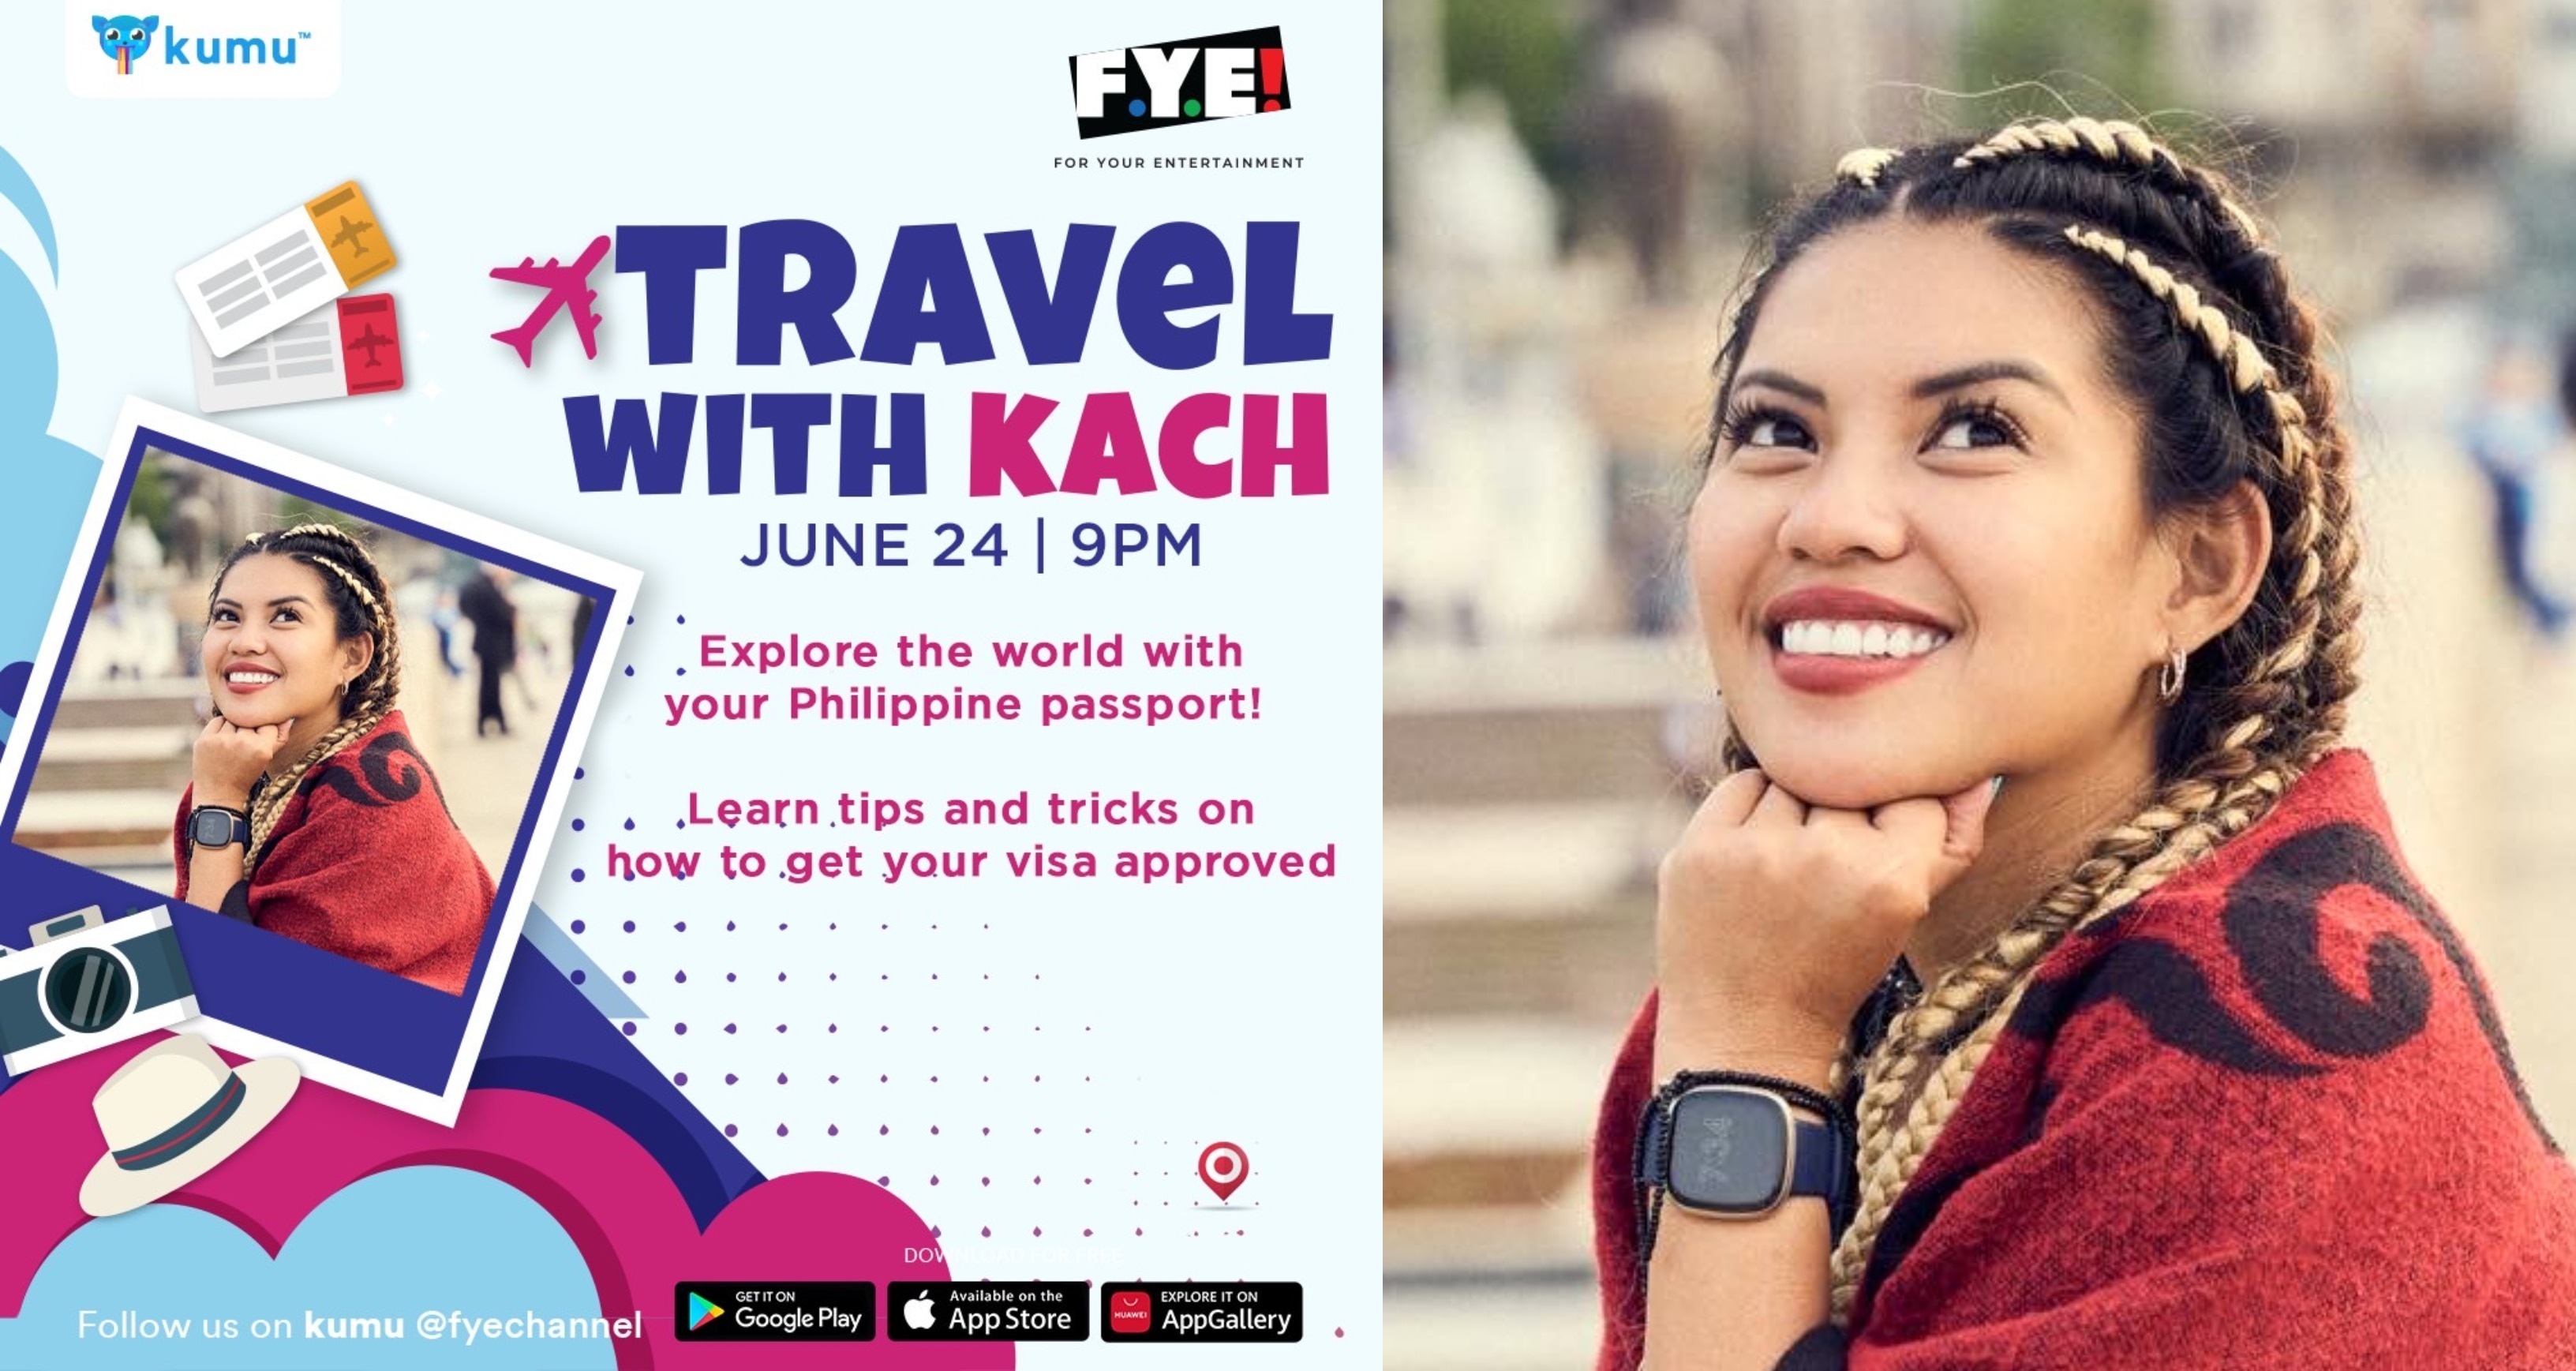 Seasoned traveler shares tips in new FYE Channel show "Travel with Kach"